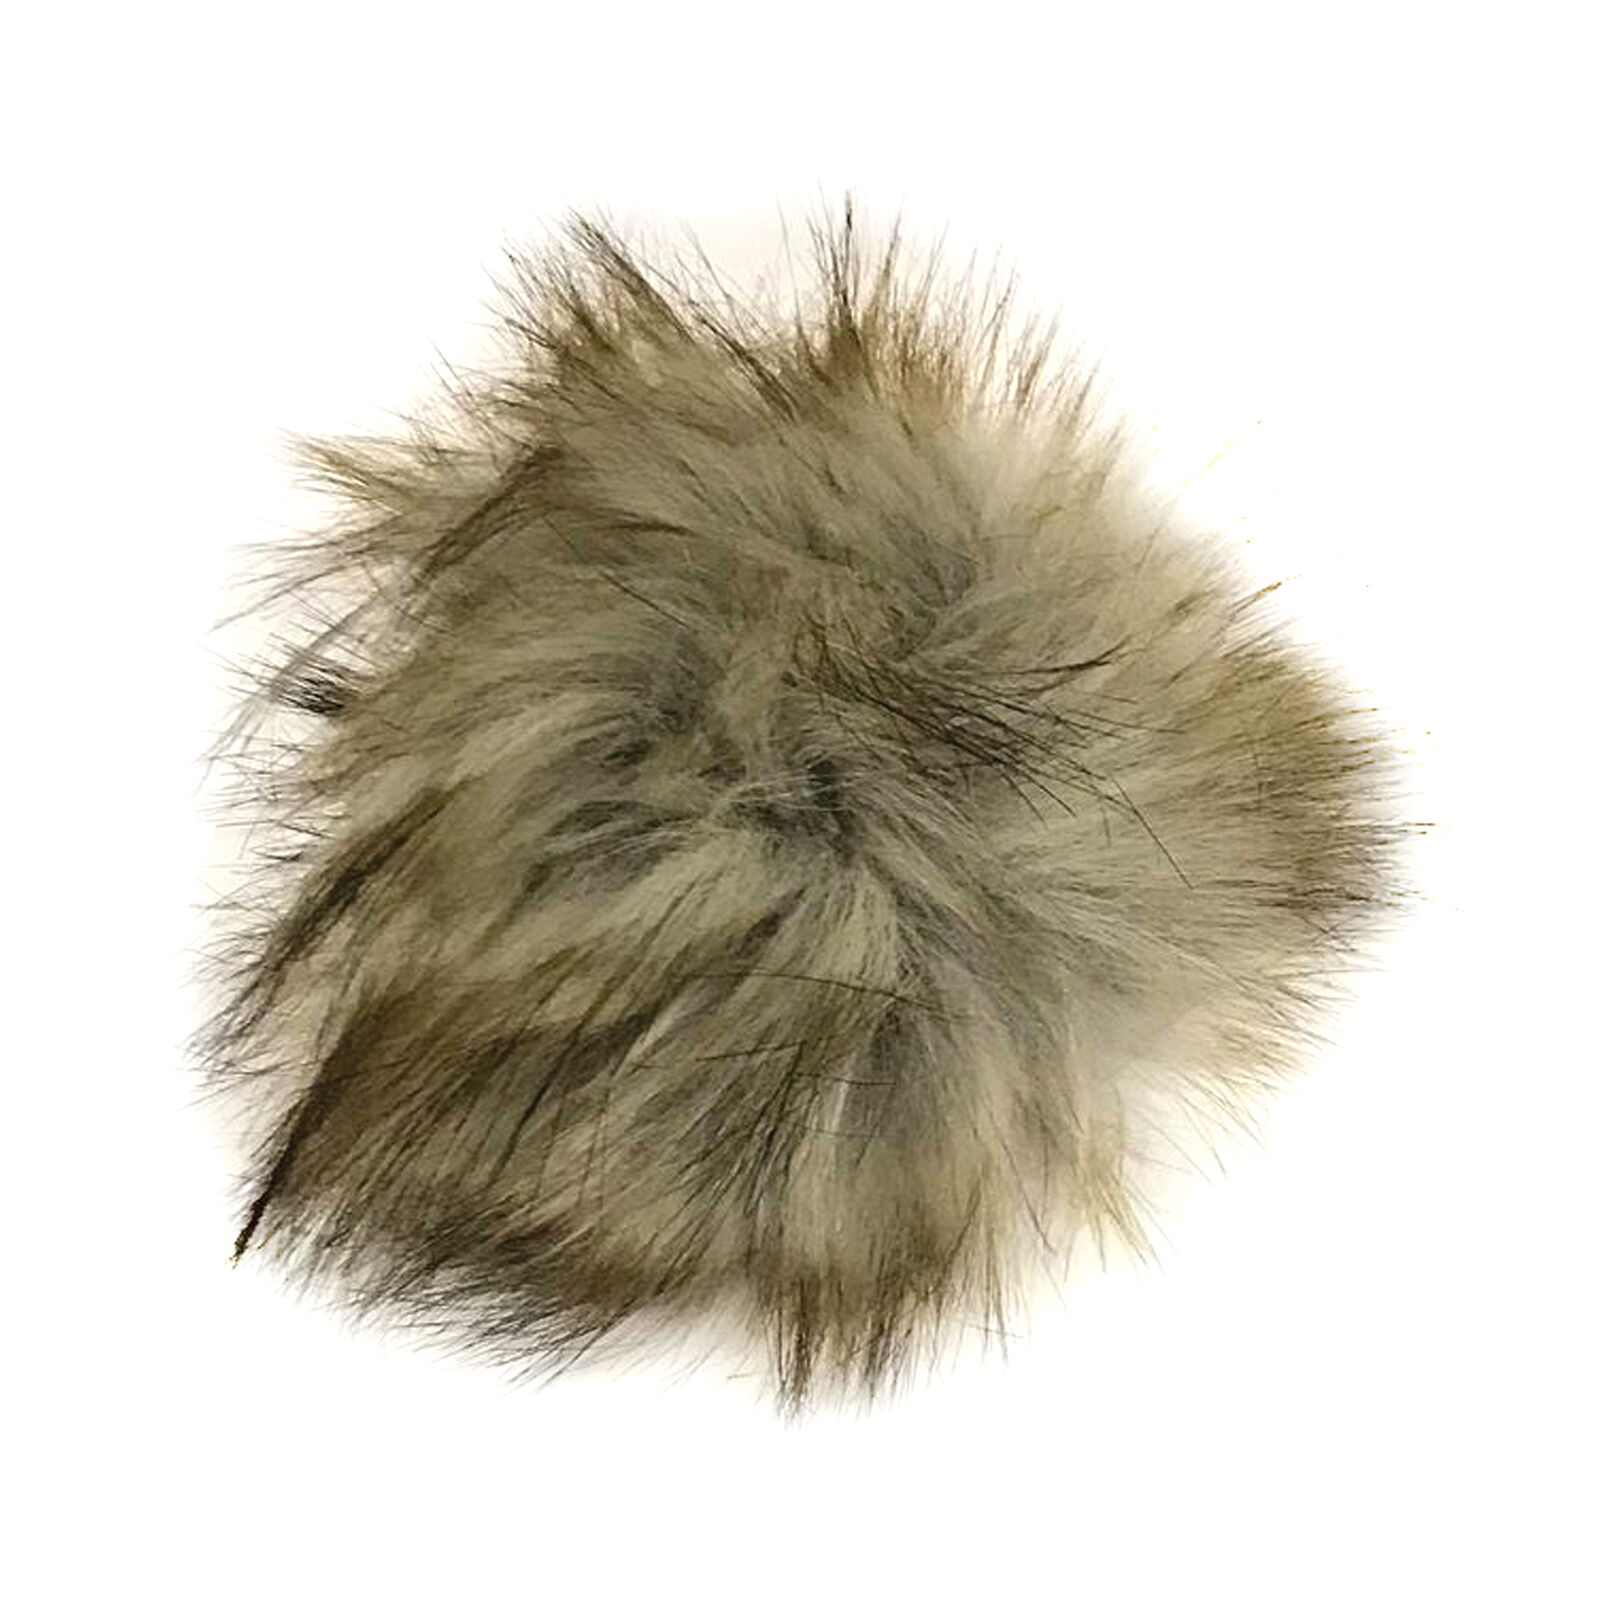 Woof Wear Pom For Convertible Safety Hat Cover - Cappuccino One Size